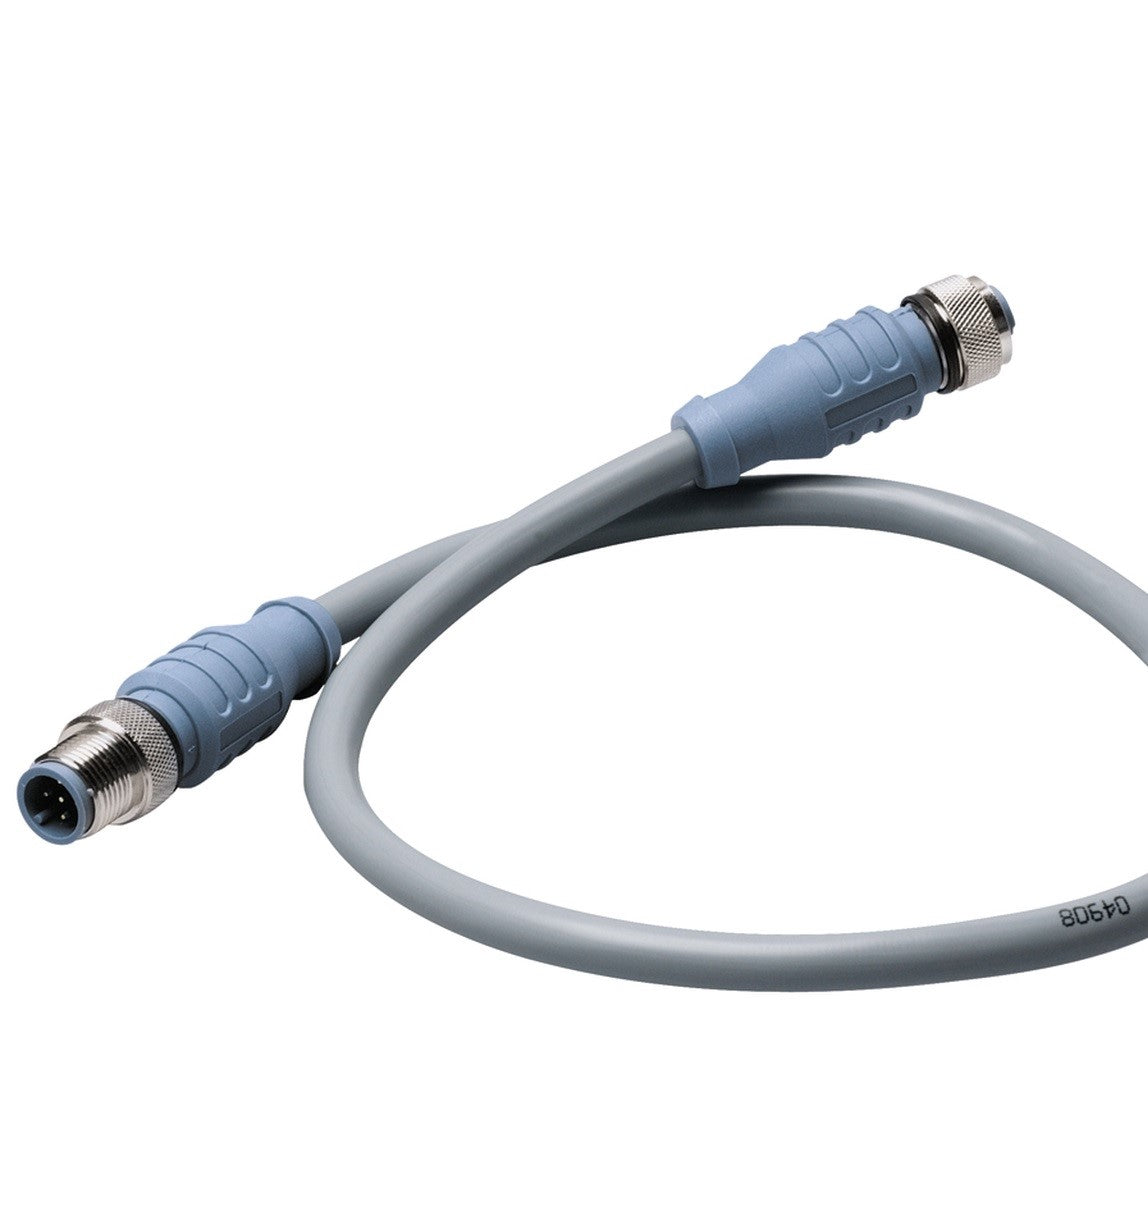 Maretron Micro Cable 5 Meter Male To Female Connectors